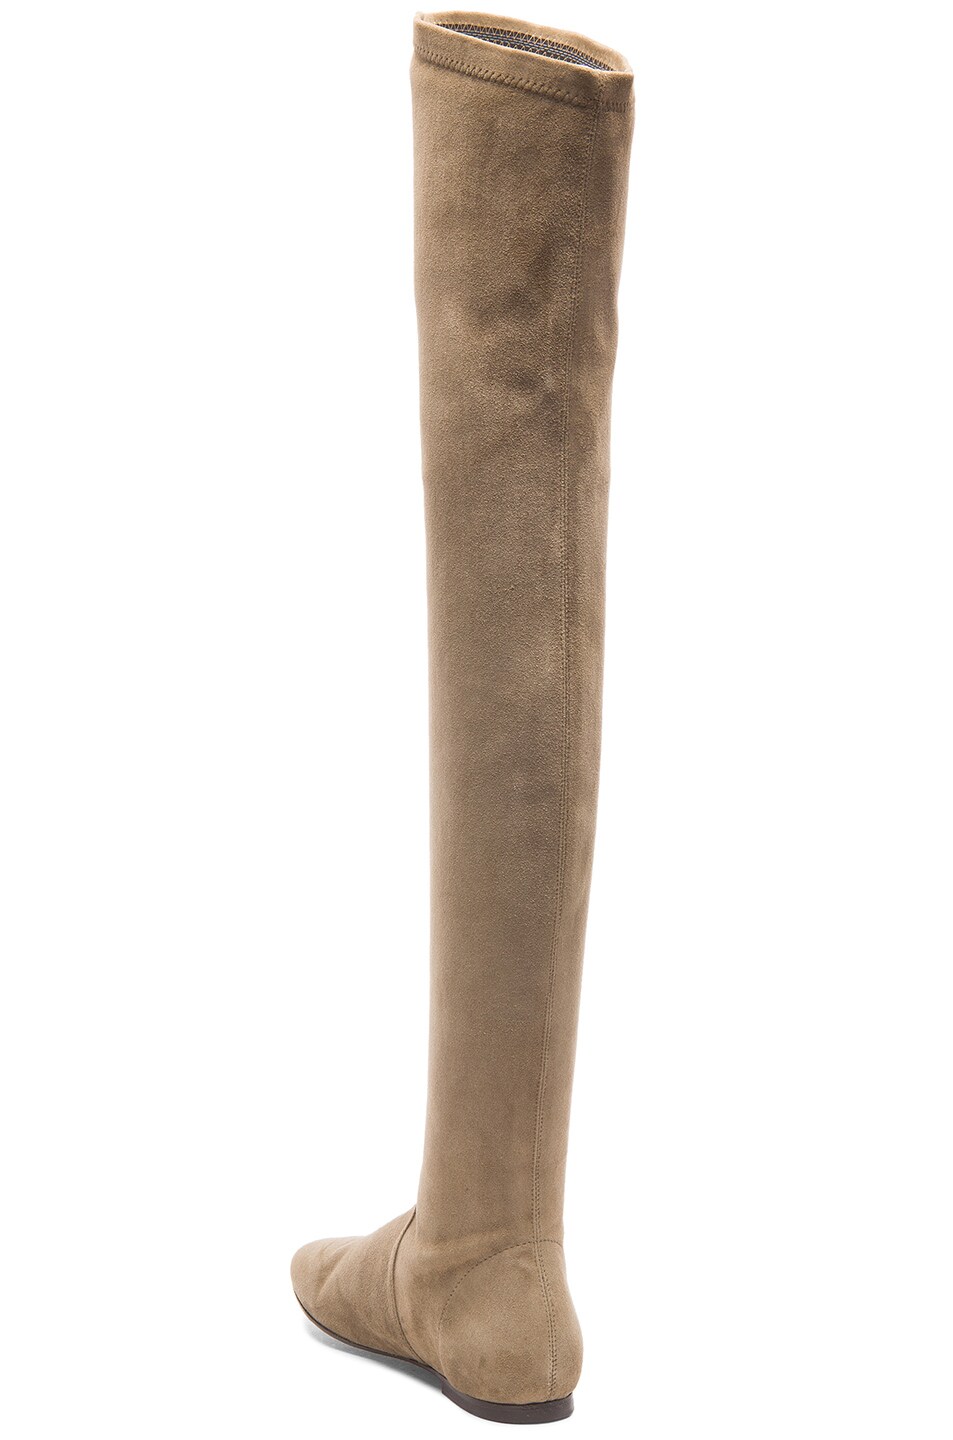 Isabel Marant Etoile Brenna Over the Knee Suede Boots in Taupe | FWRD